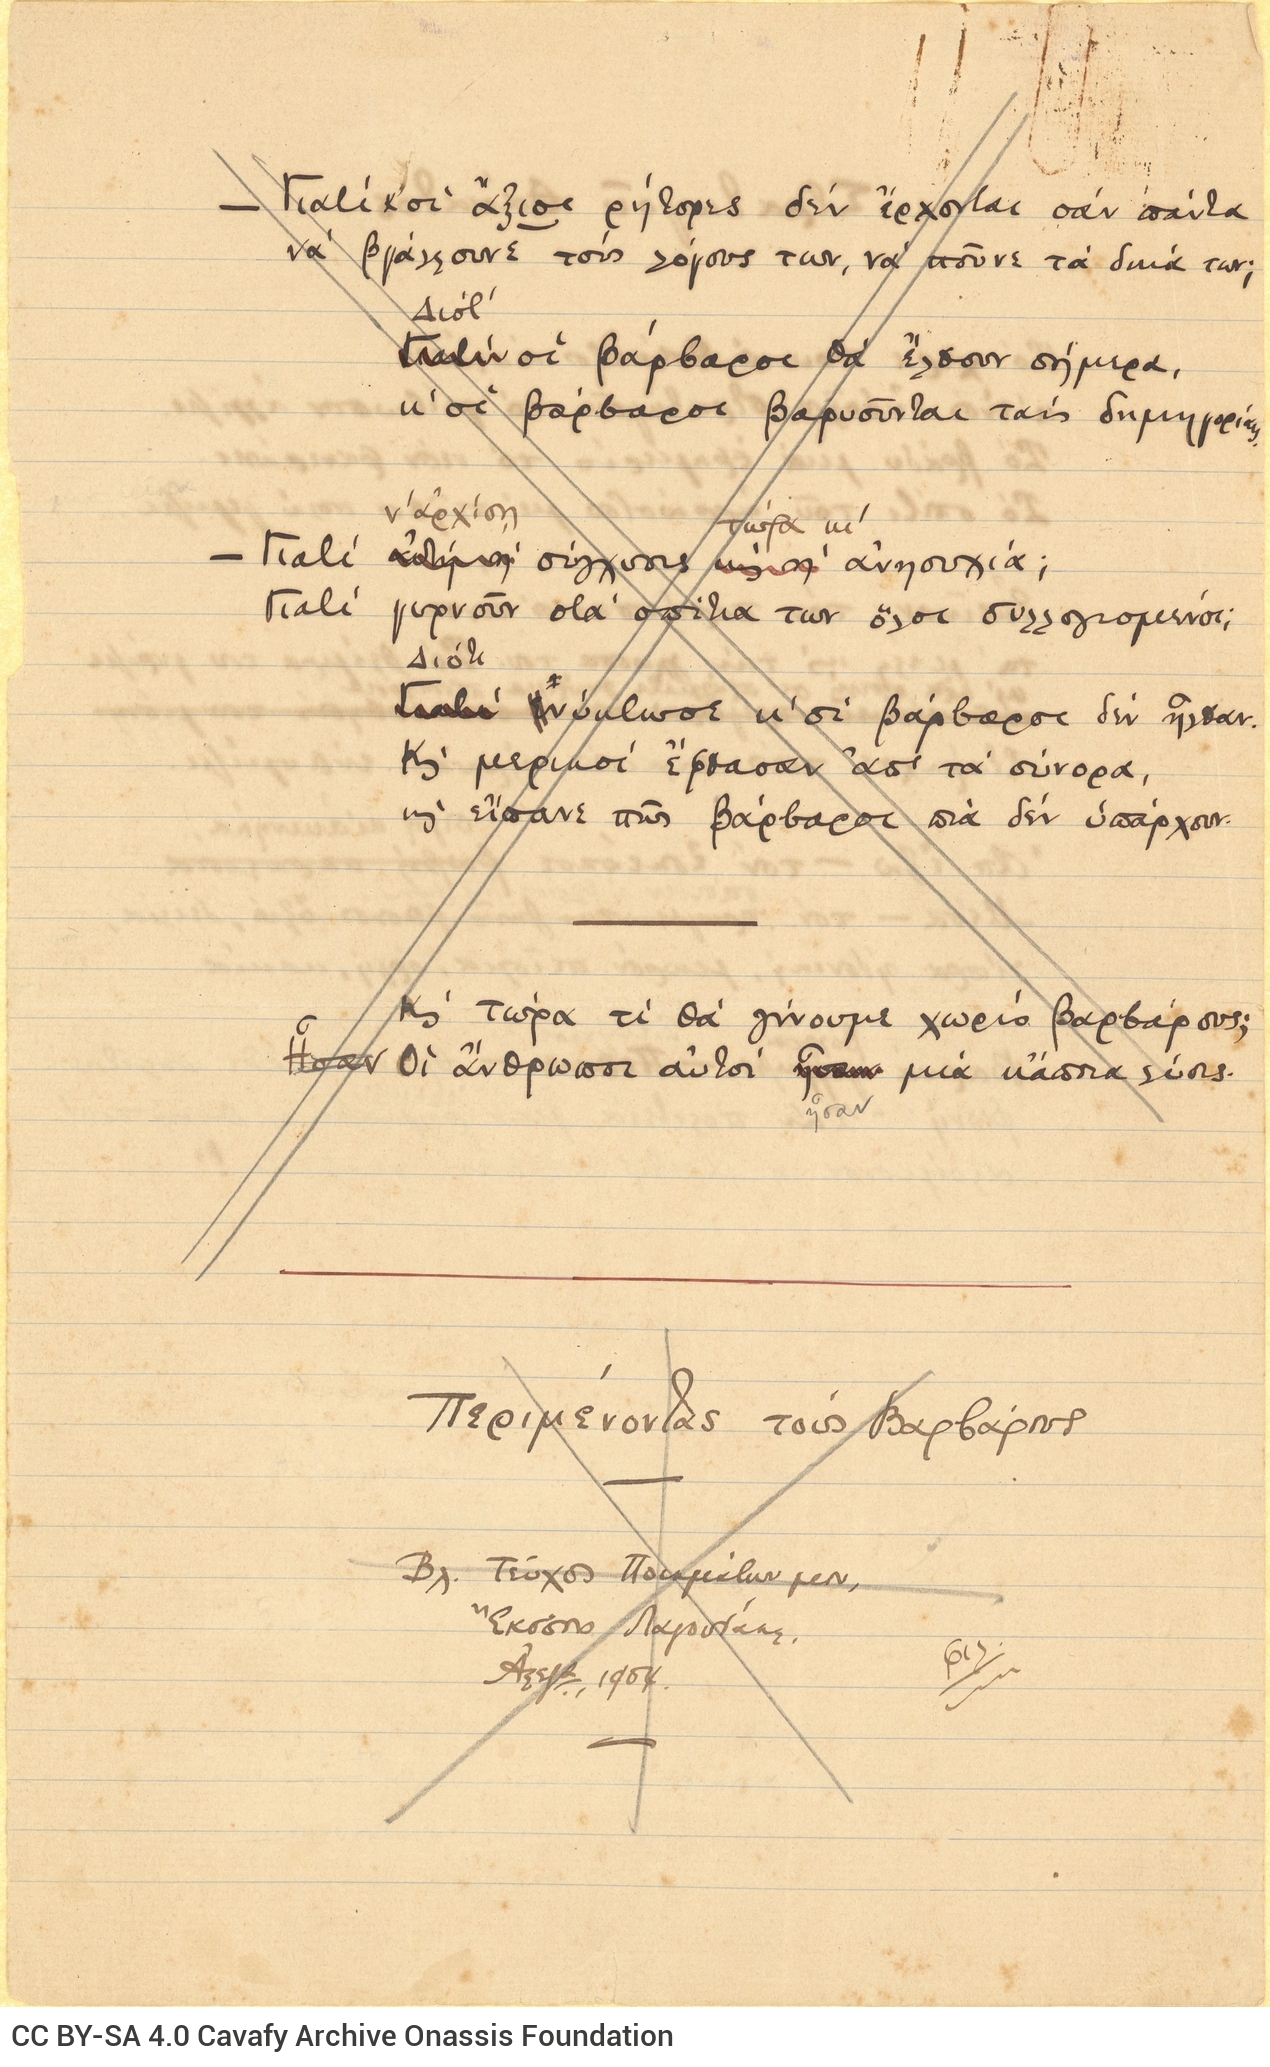 Manuscript of a poem and attached handwritten note. The poem "Death of a General" as well as notes on the margin, cancella